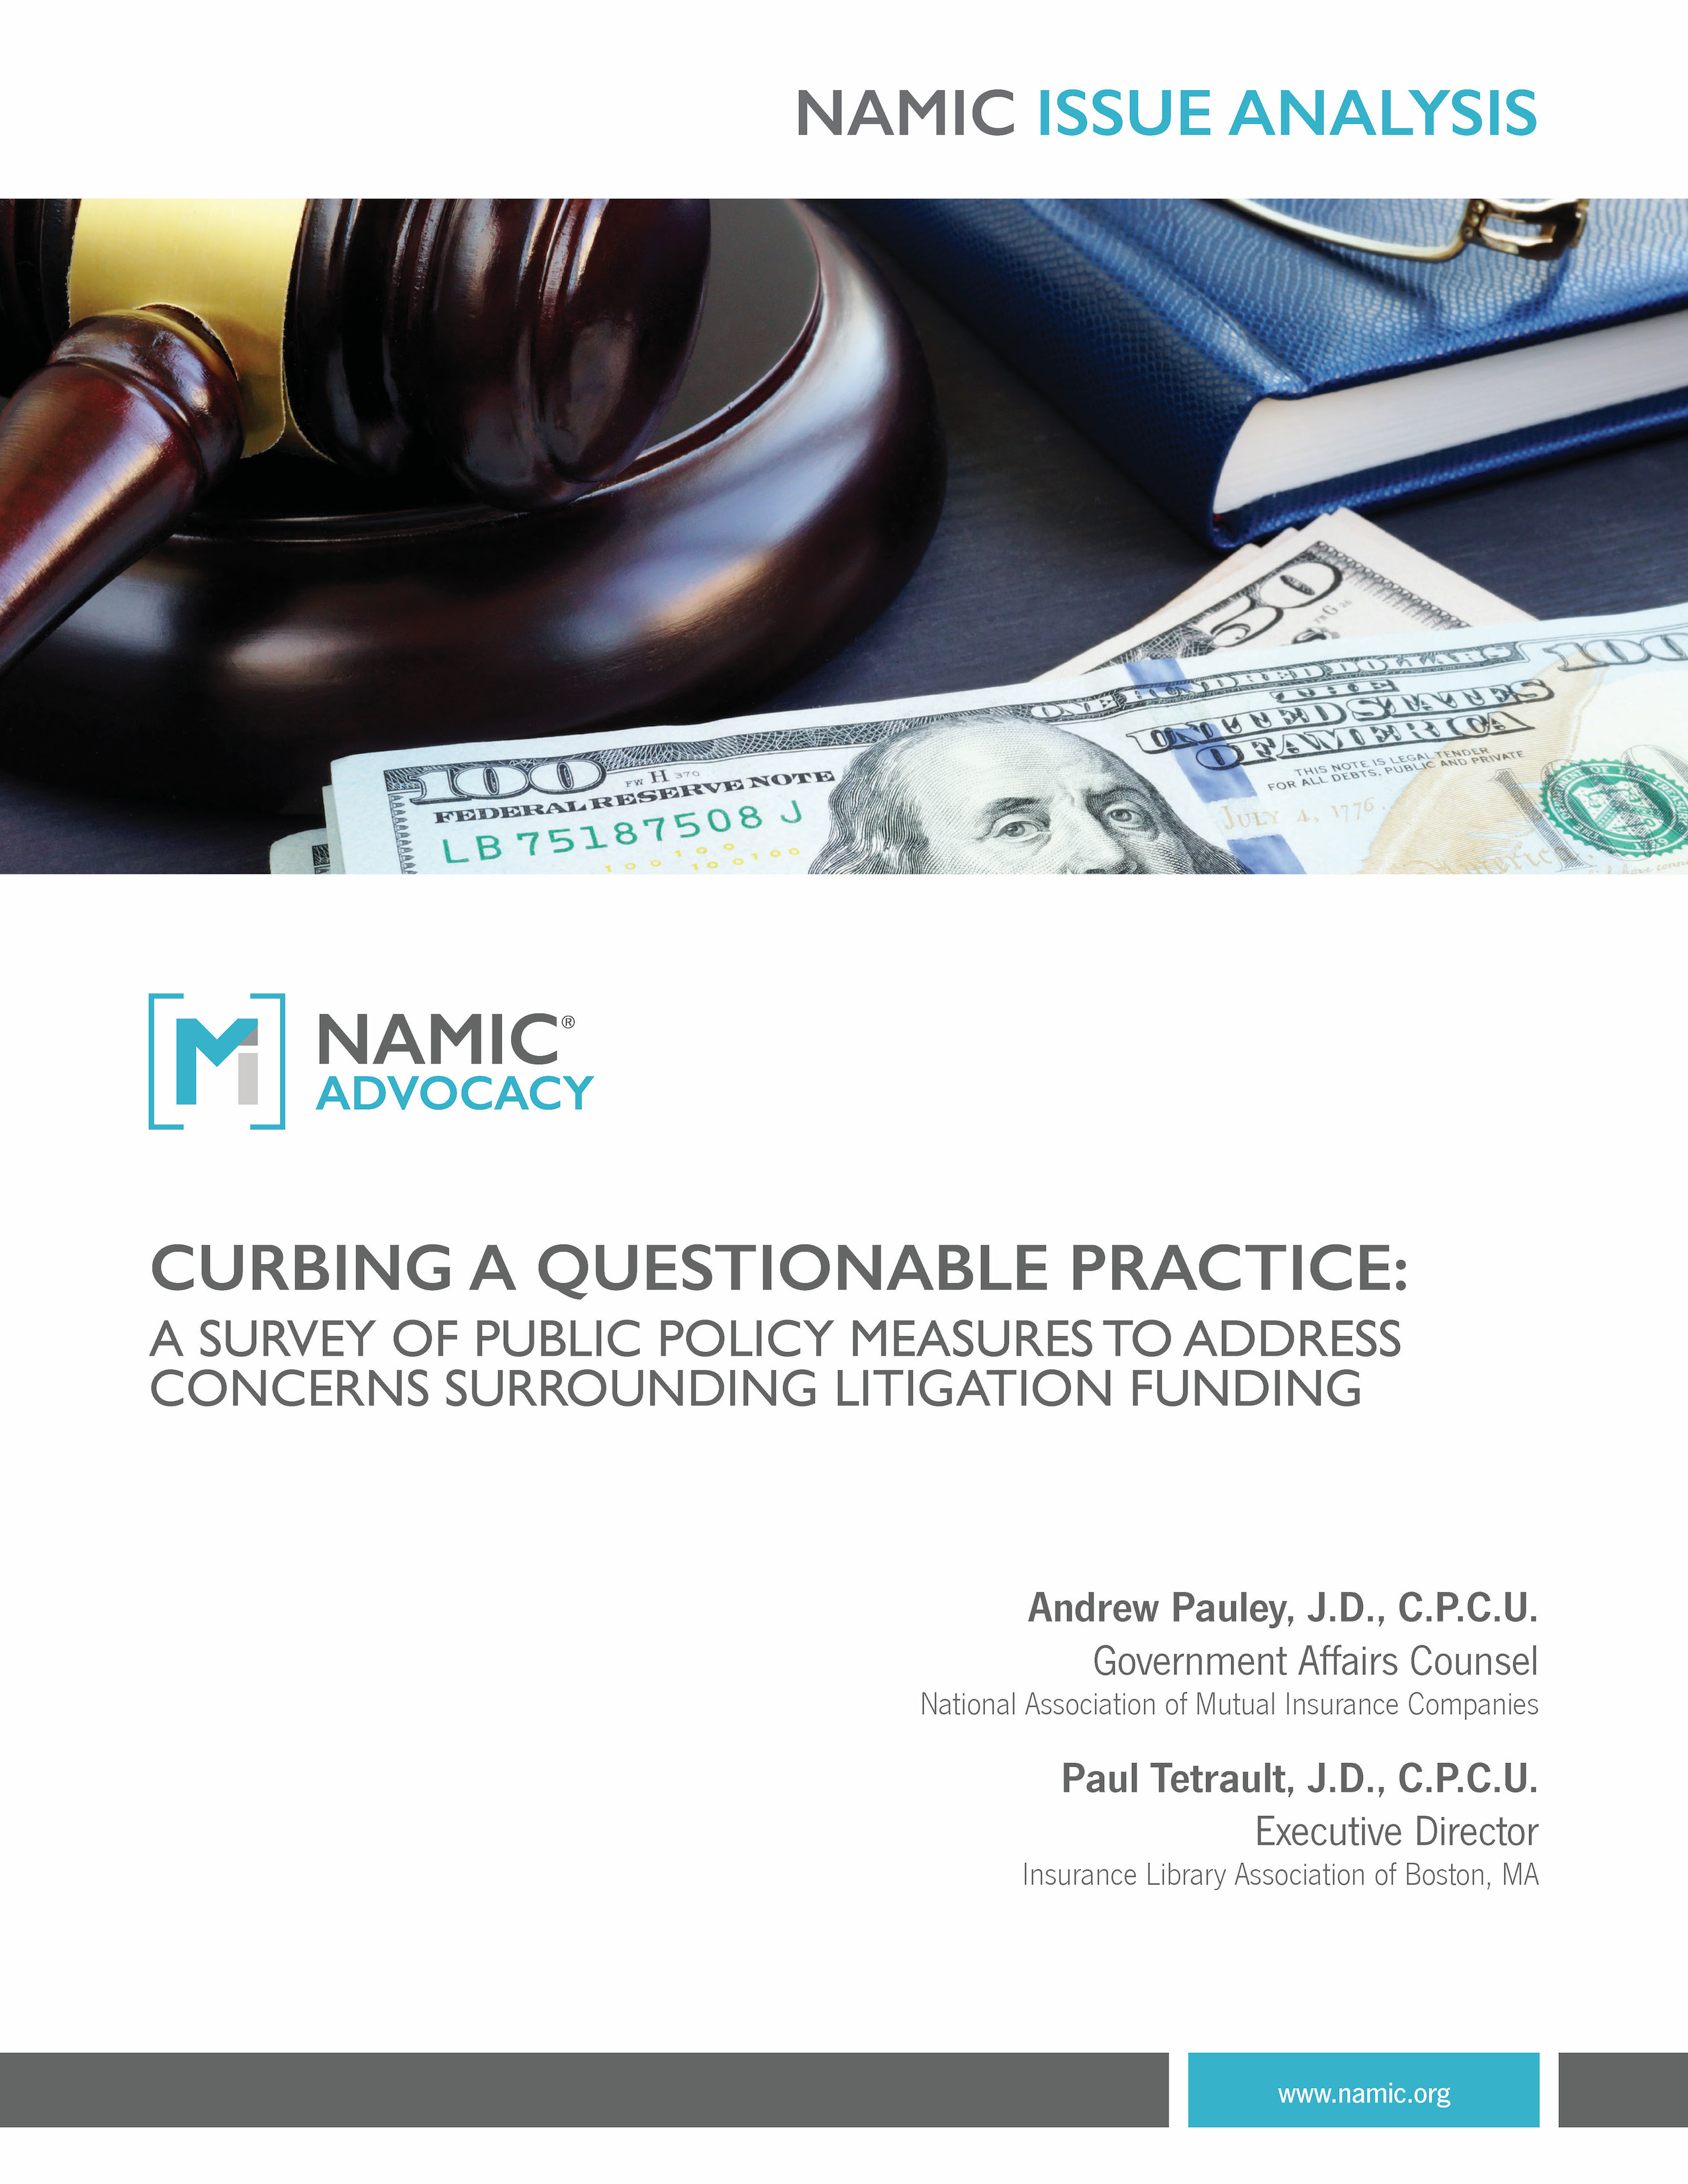 Curbing a Questionable Practice: A Survey of Public Policy Measures to Address Concerns Surrounding Litigation Funding PDF